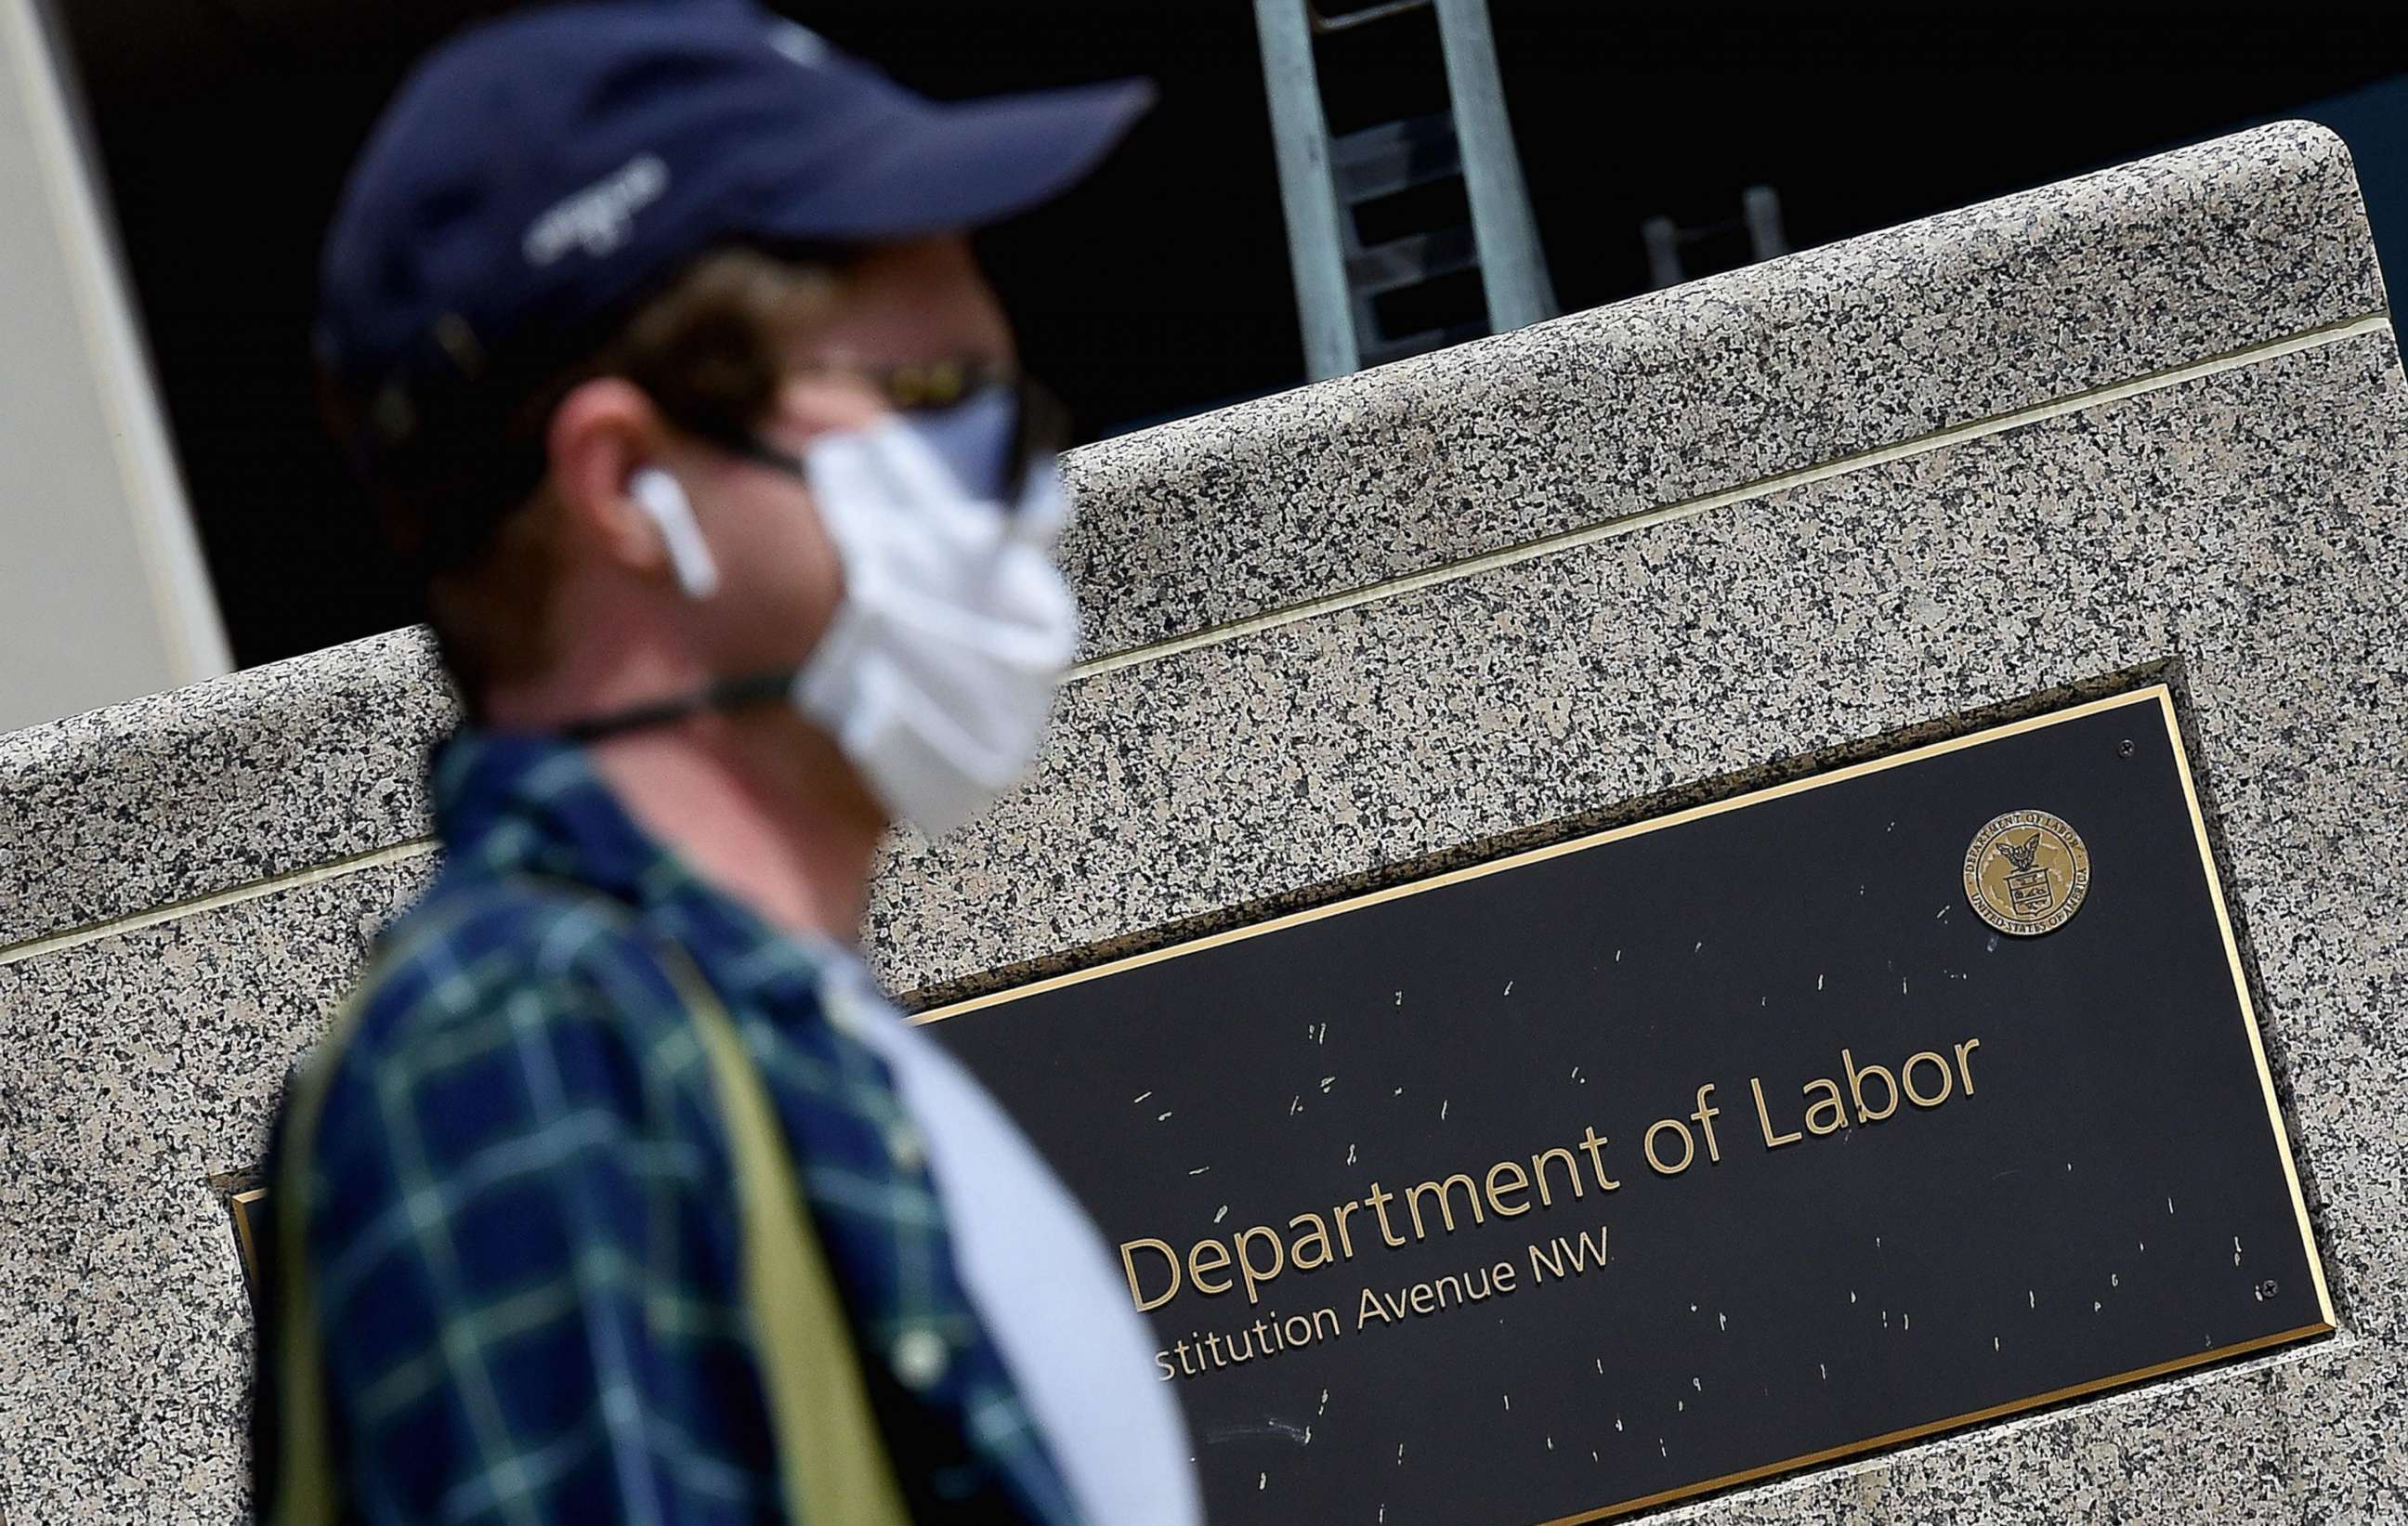 PHOTO: A woman wearing a face mask walks past a sign in front of the U.S. Department of Labor amid the coronavirus pandemic on April 29, 2020, in Washington, D.C.